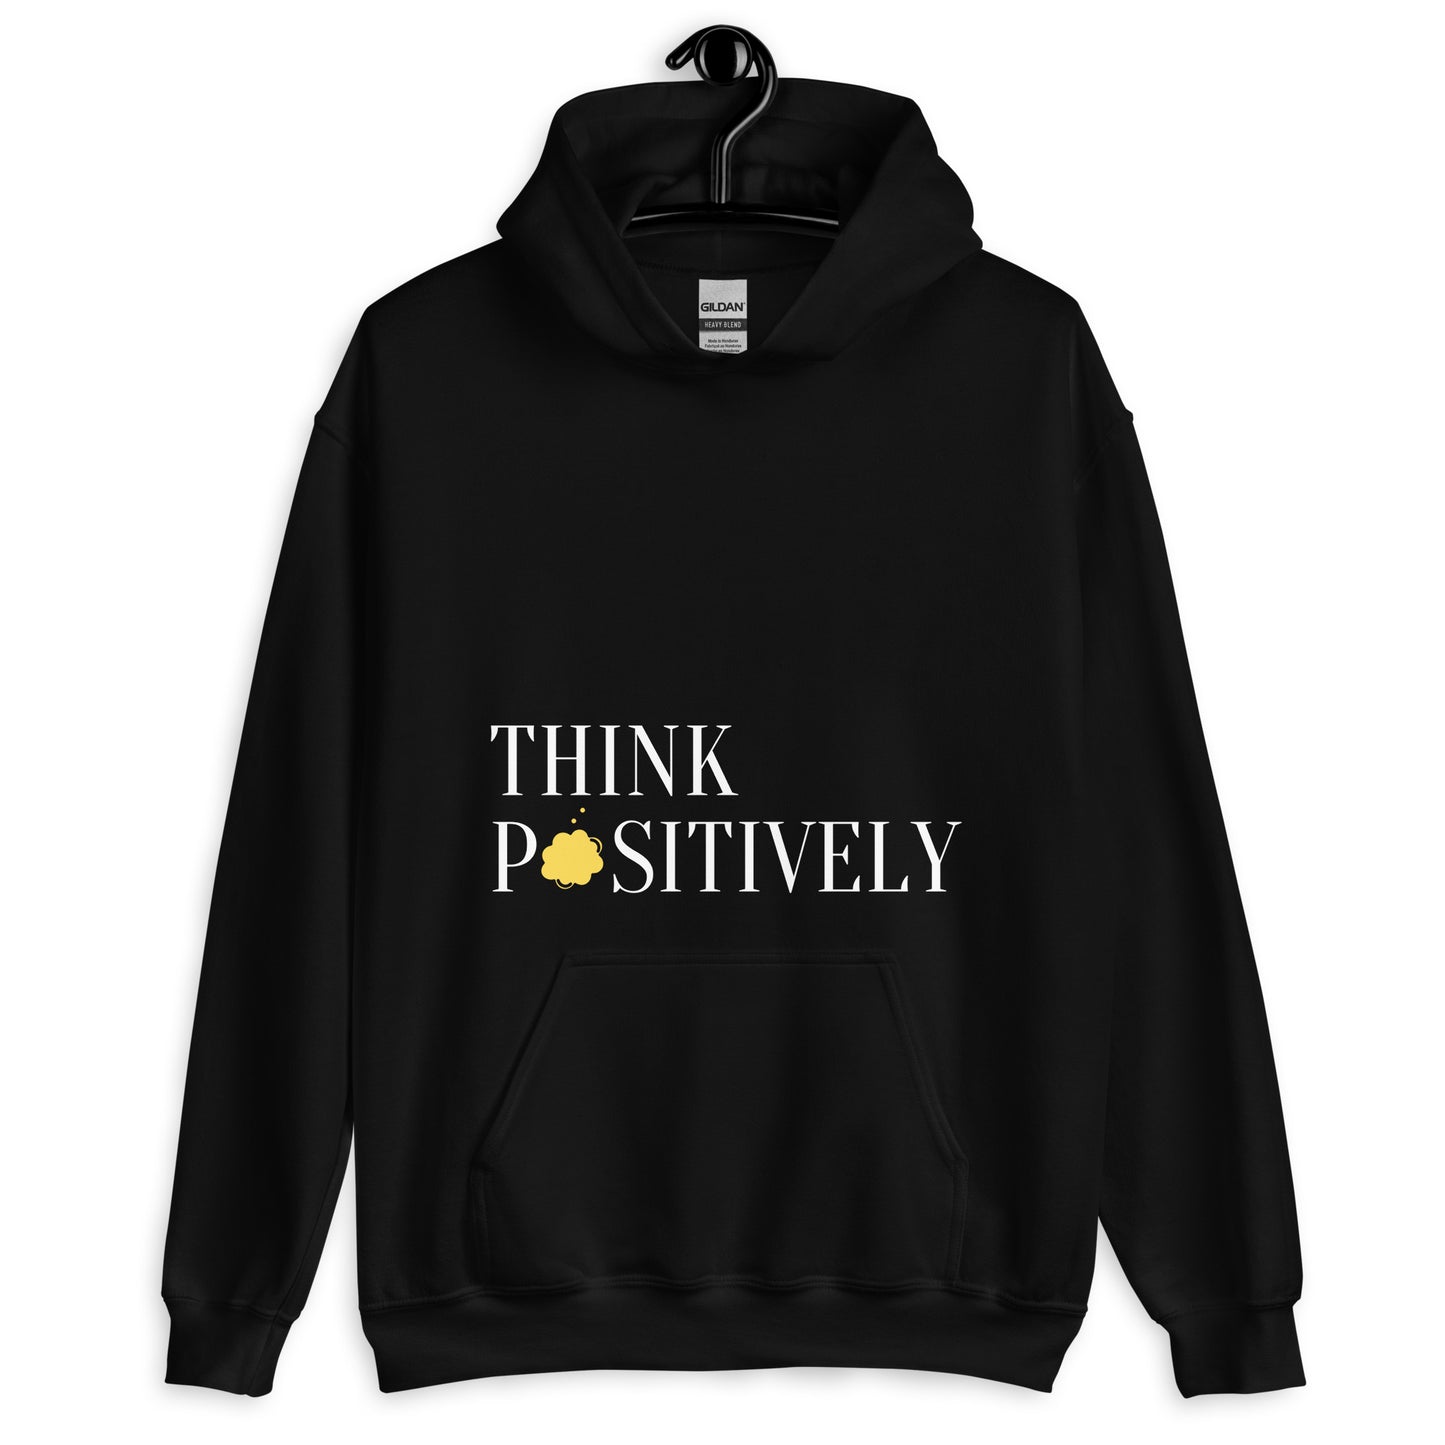 Think positively hoodie